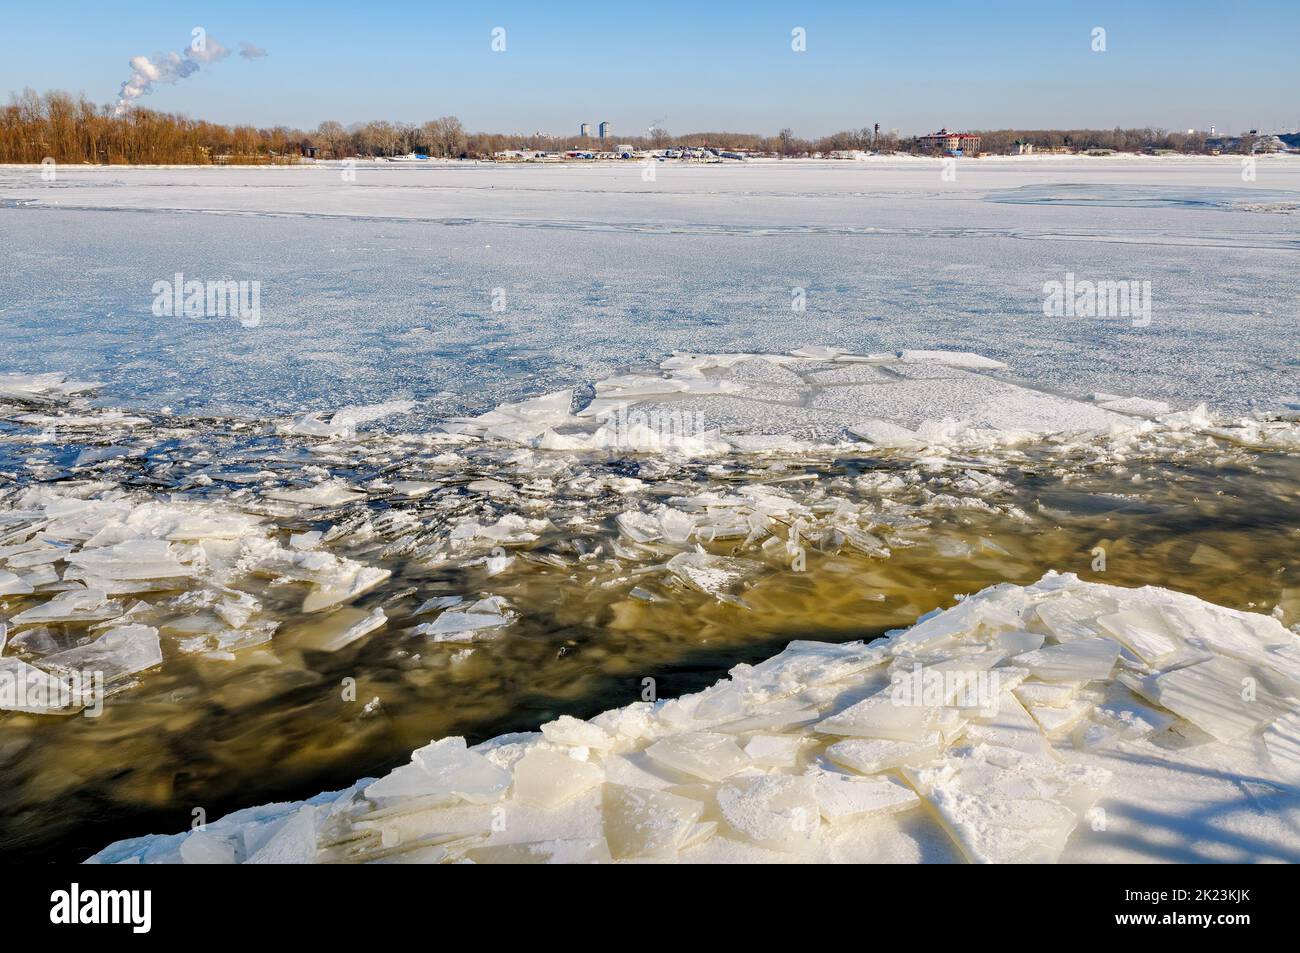 Icy Dnieper River with  blue reflections Stock Photo